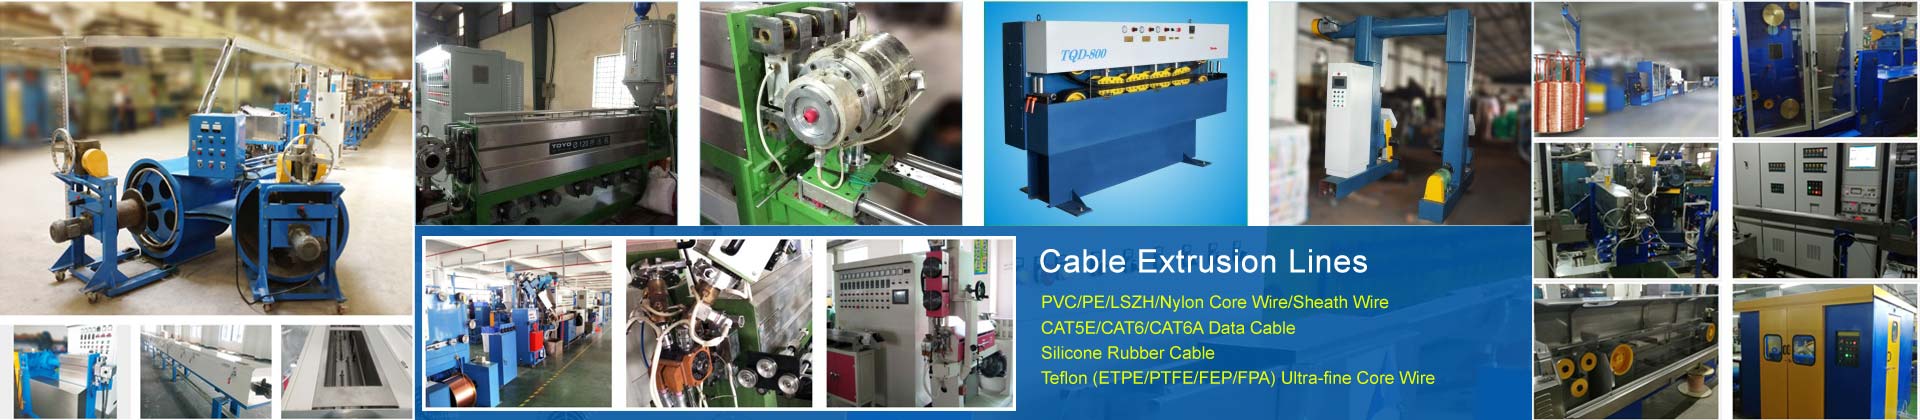 Cable Extrusion Lines